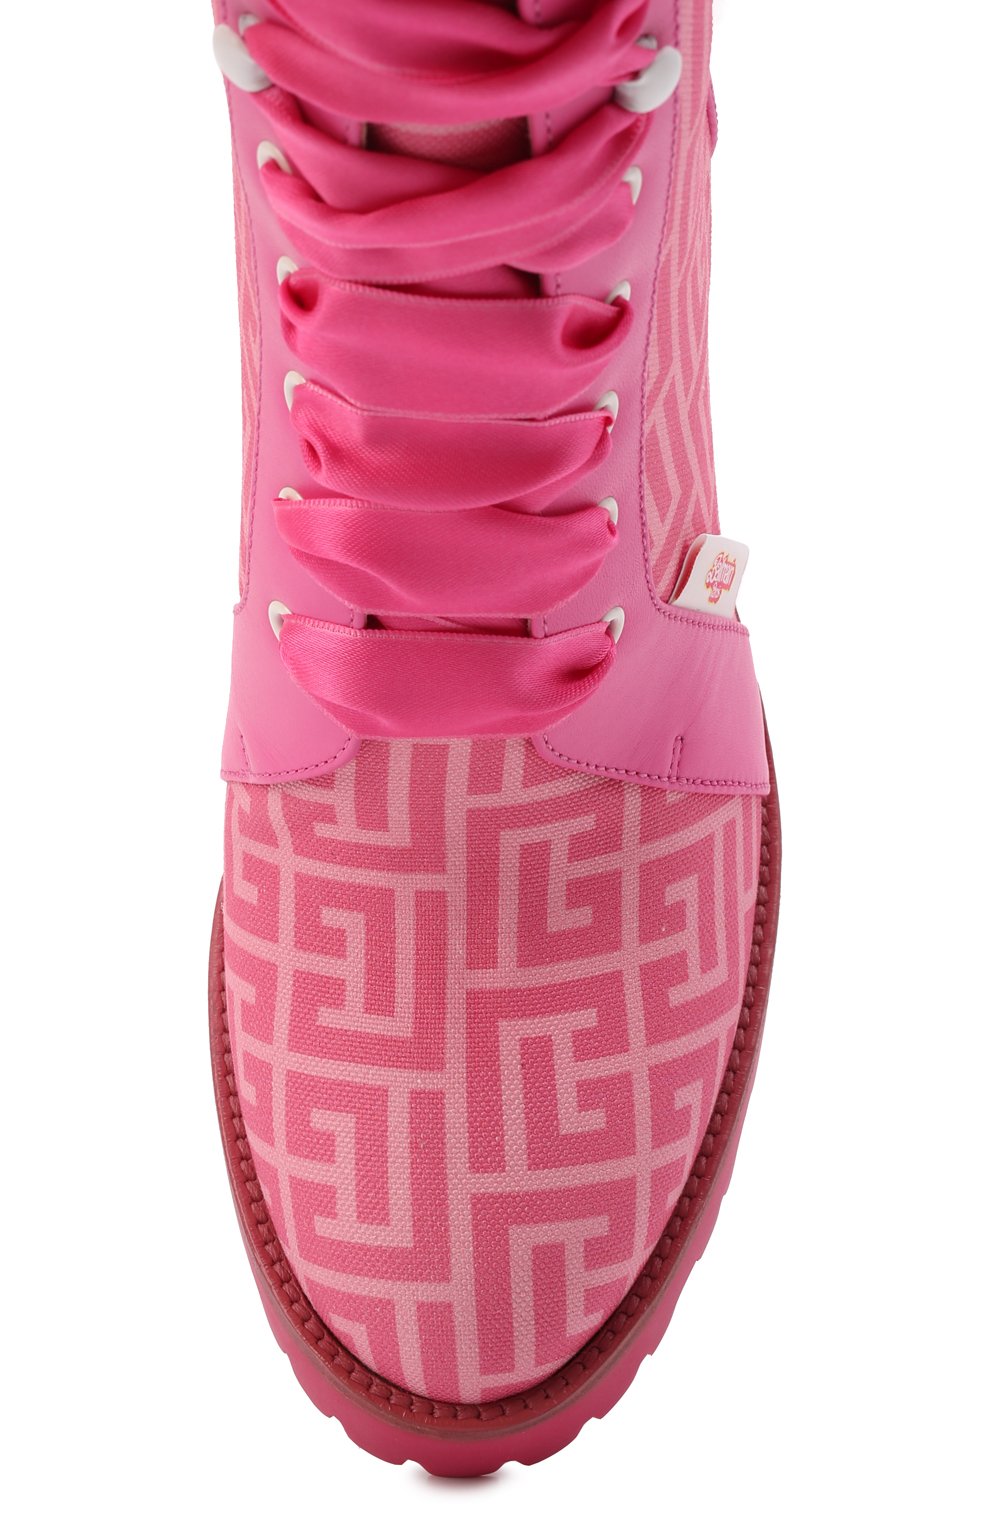 Balmain X Barbie ® Petra Ranger Ankle Boots In Pink Lyst, 41% OFF